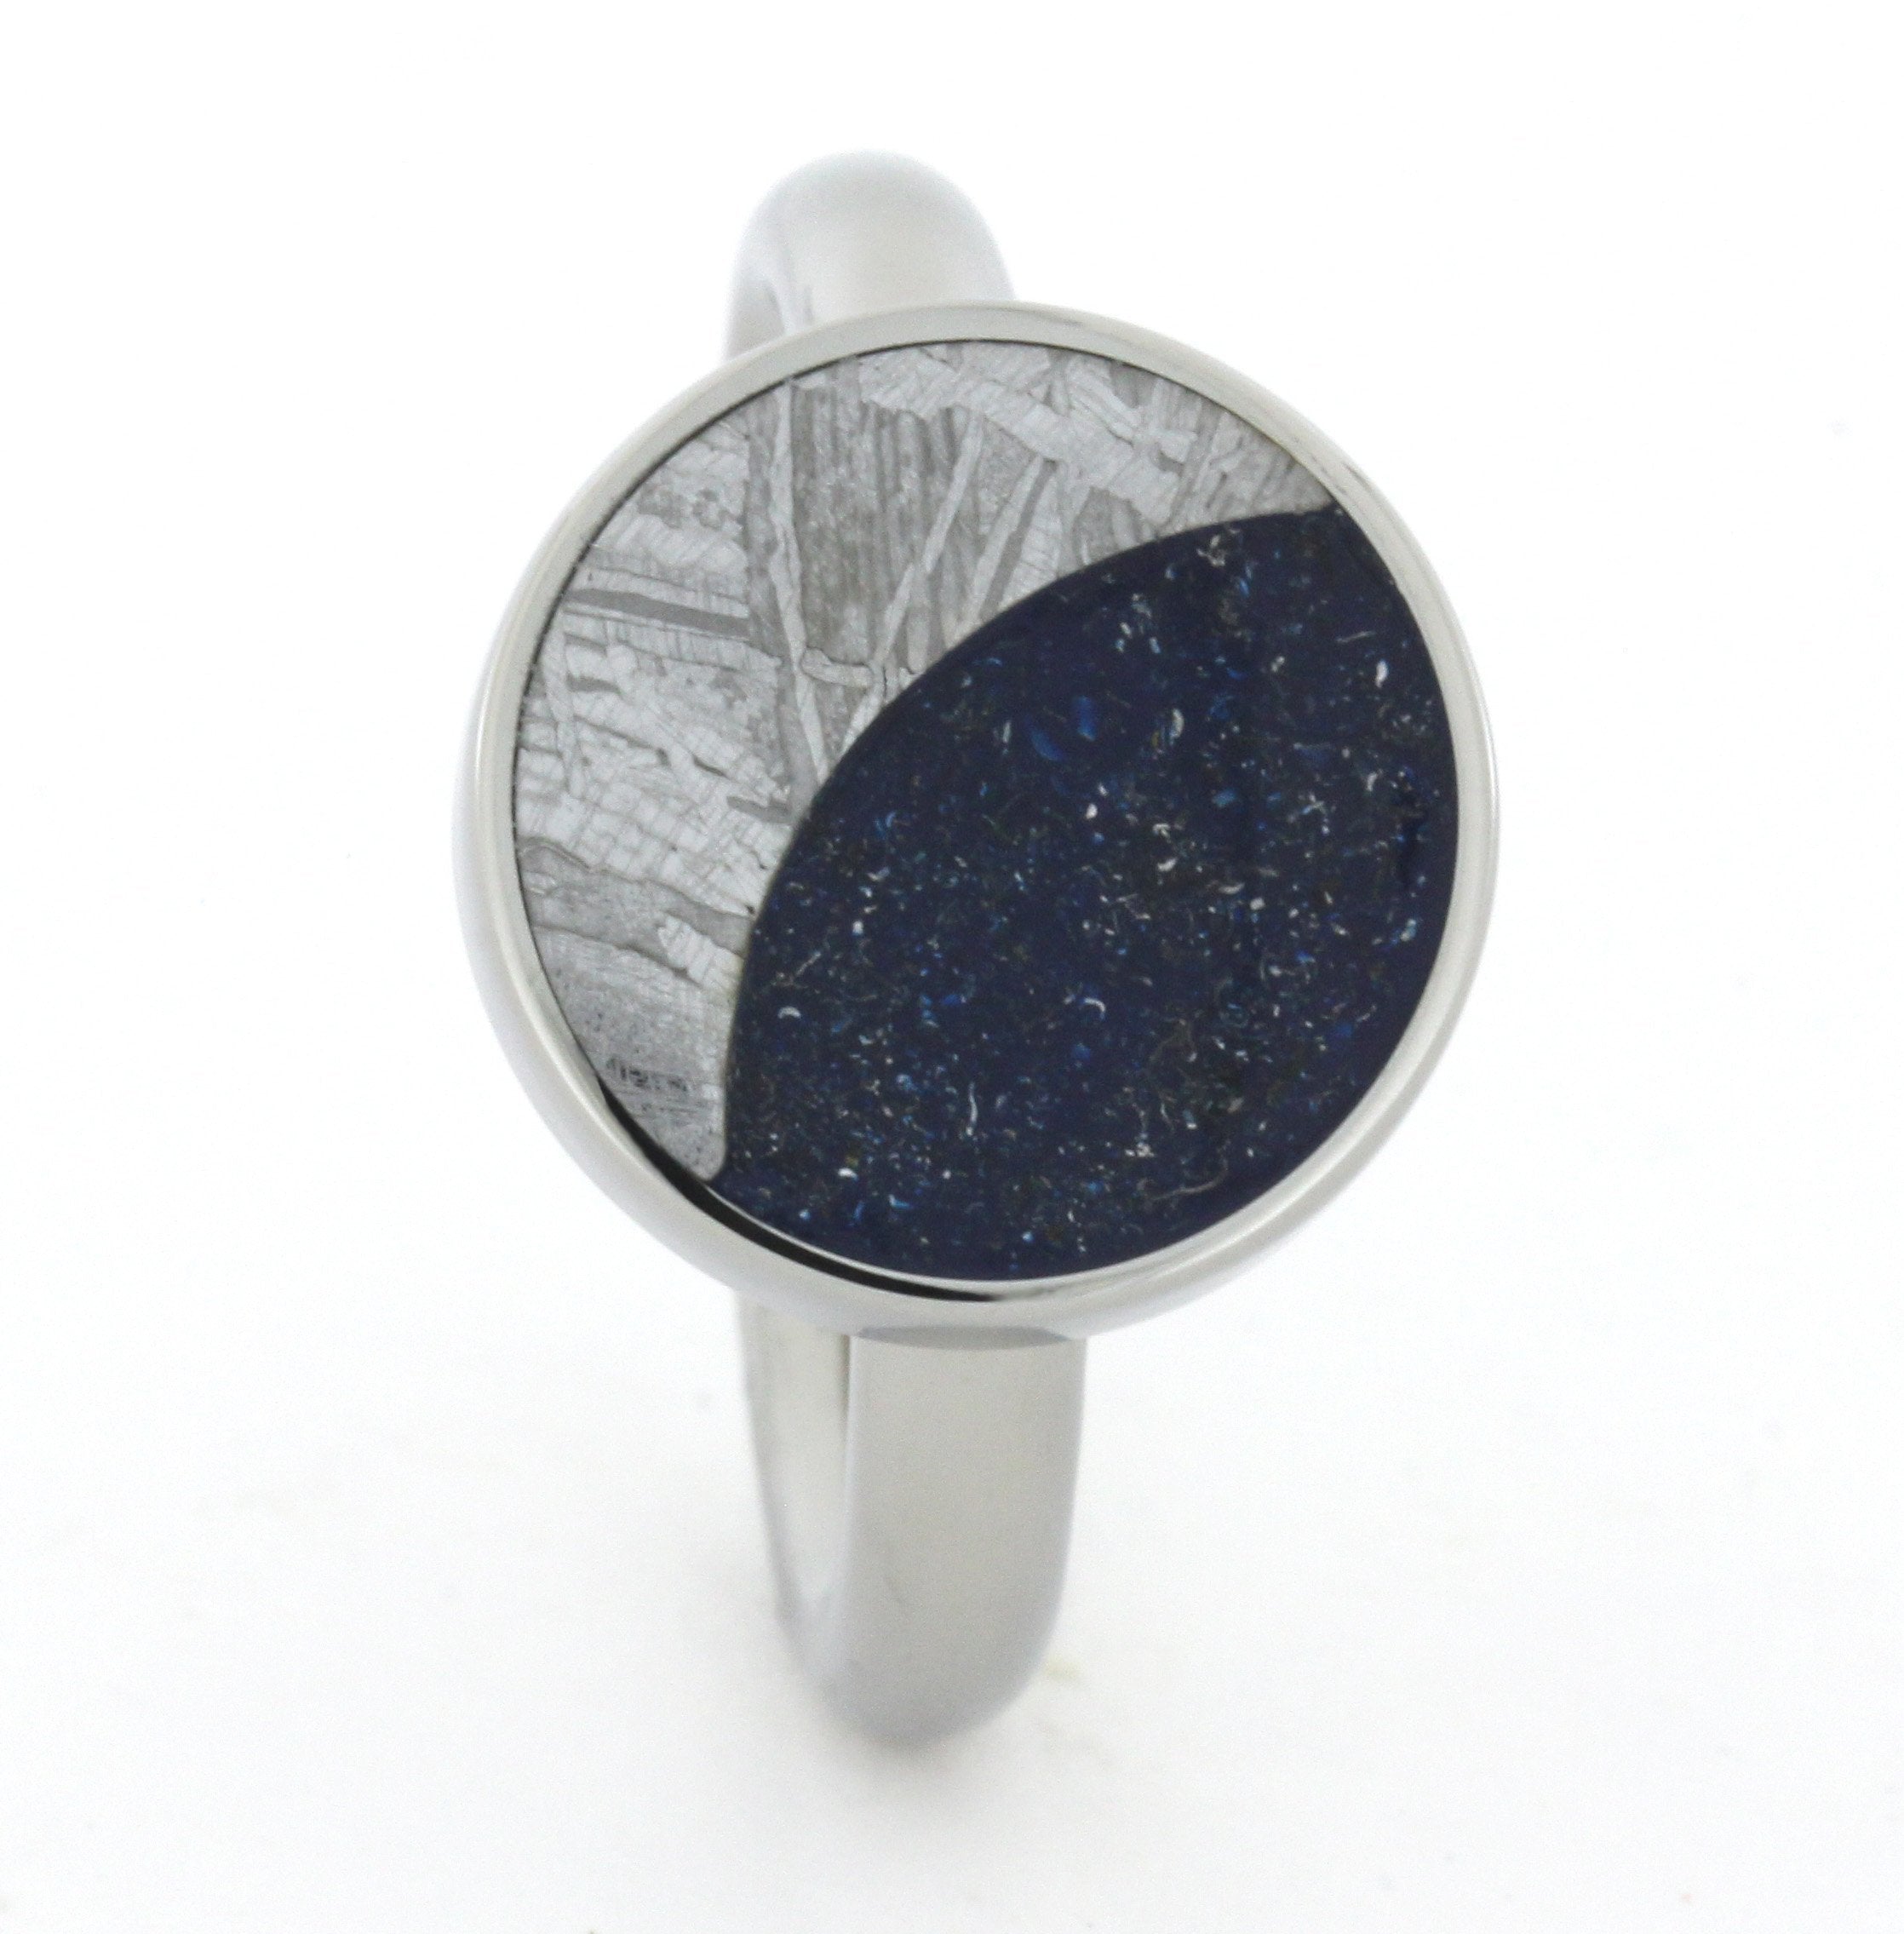 Starry Night Ring with Meteorite Moon and Blue Stardust™-2932 - Jewelry by Johan